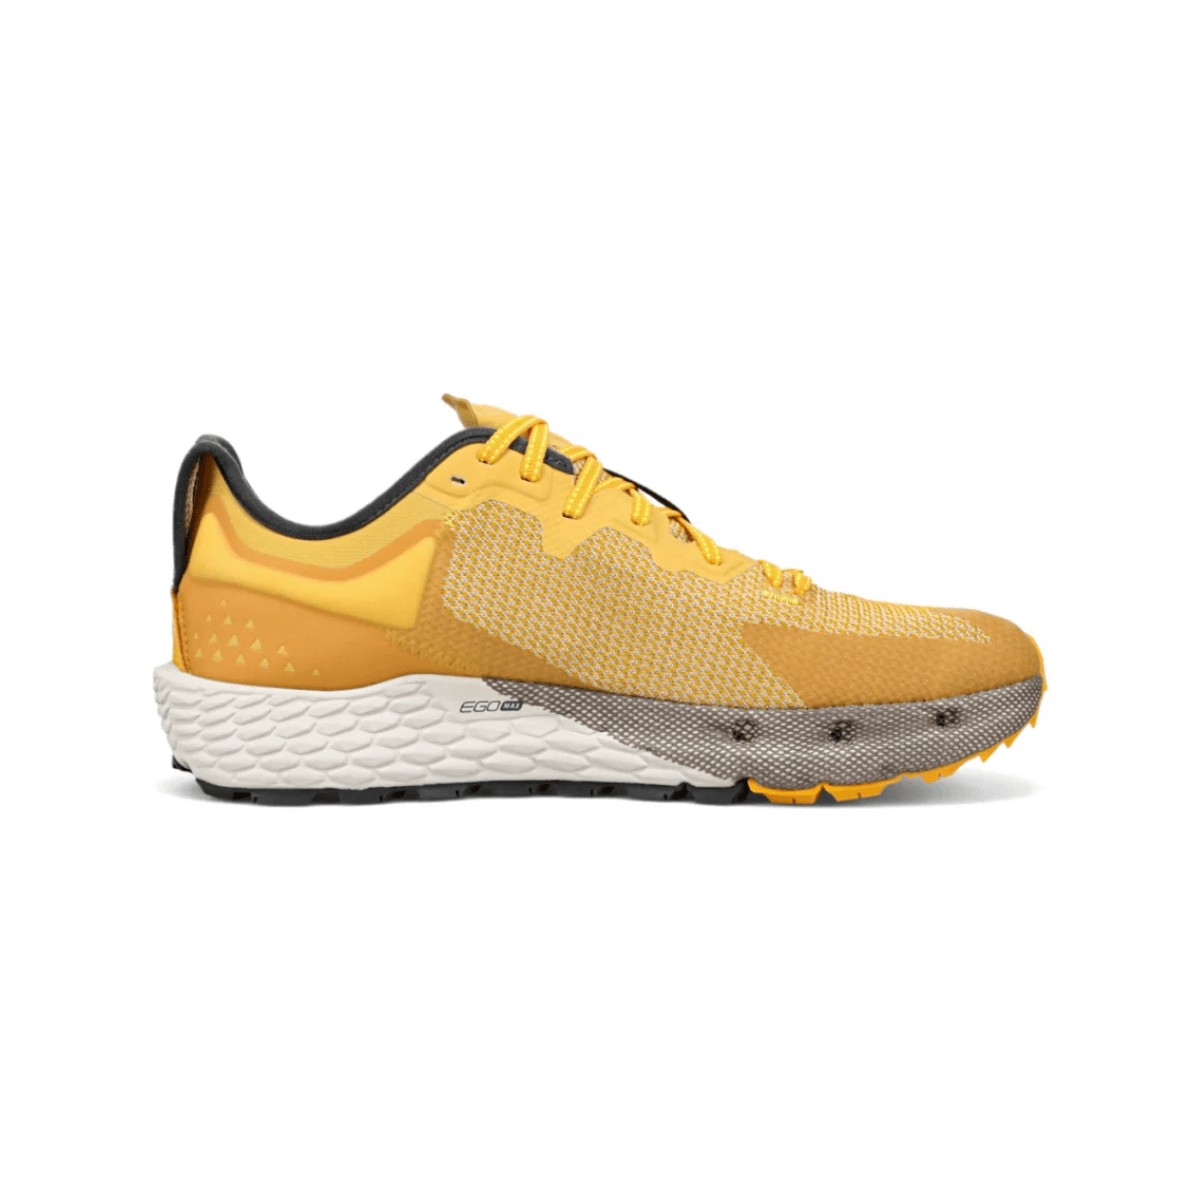 Altra Timp 4 Shoes Grey Yellow AW22, Size 42 - EUR